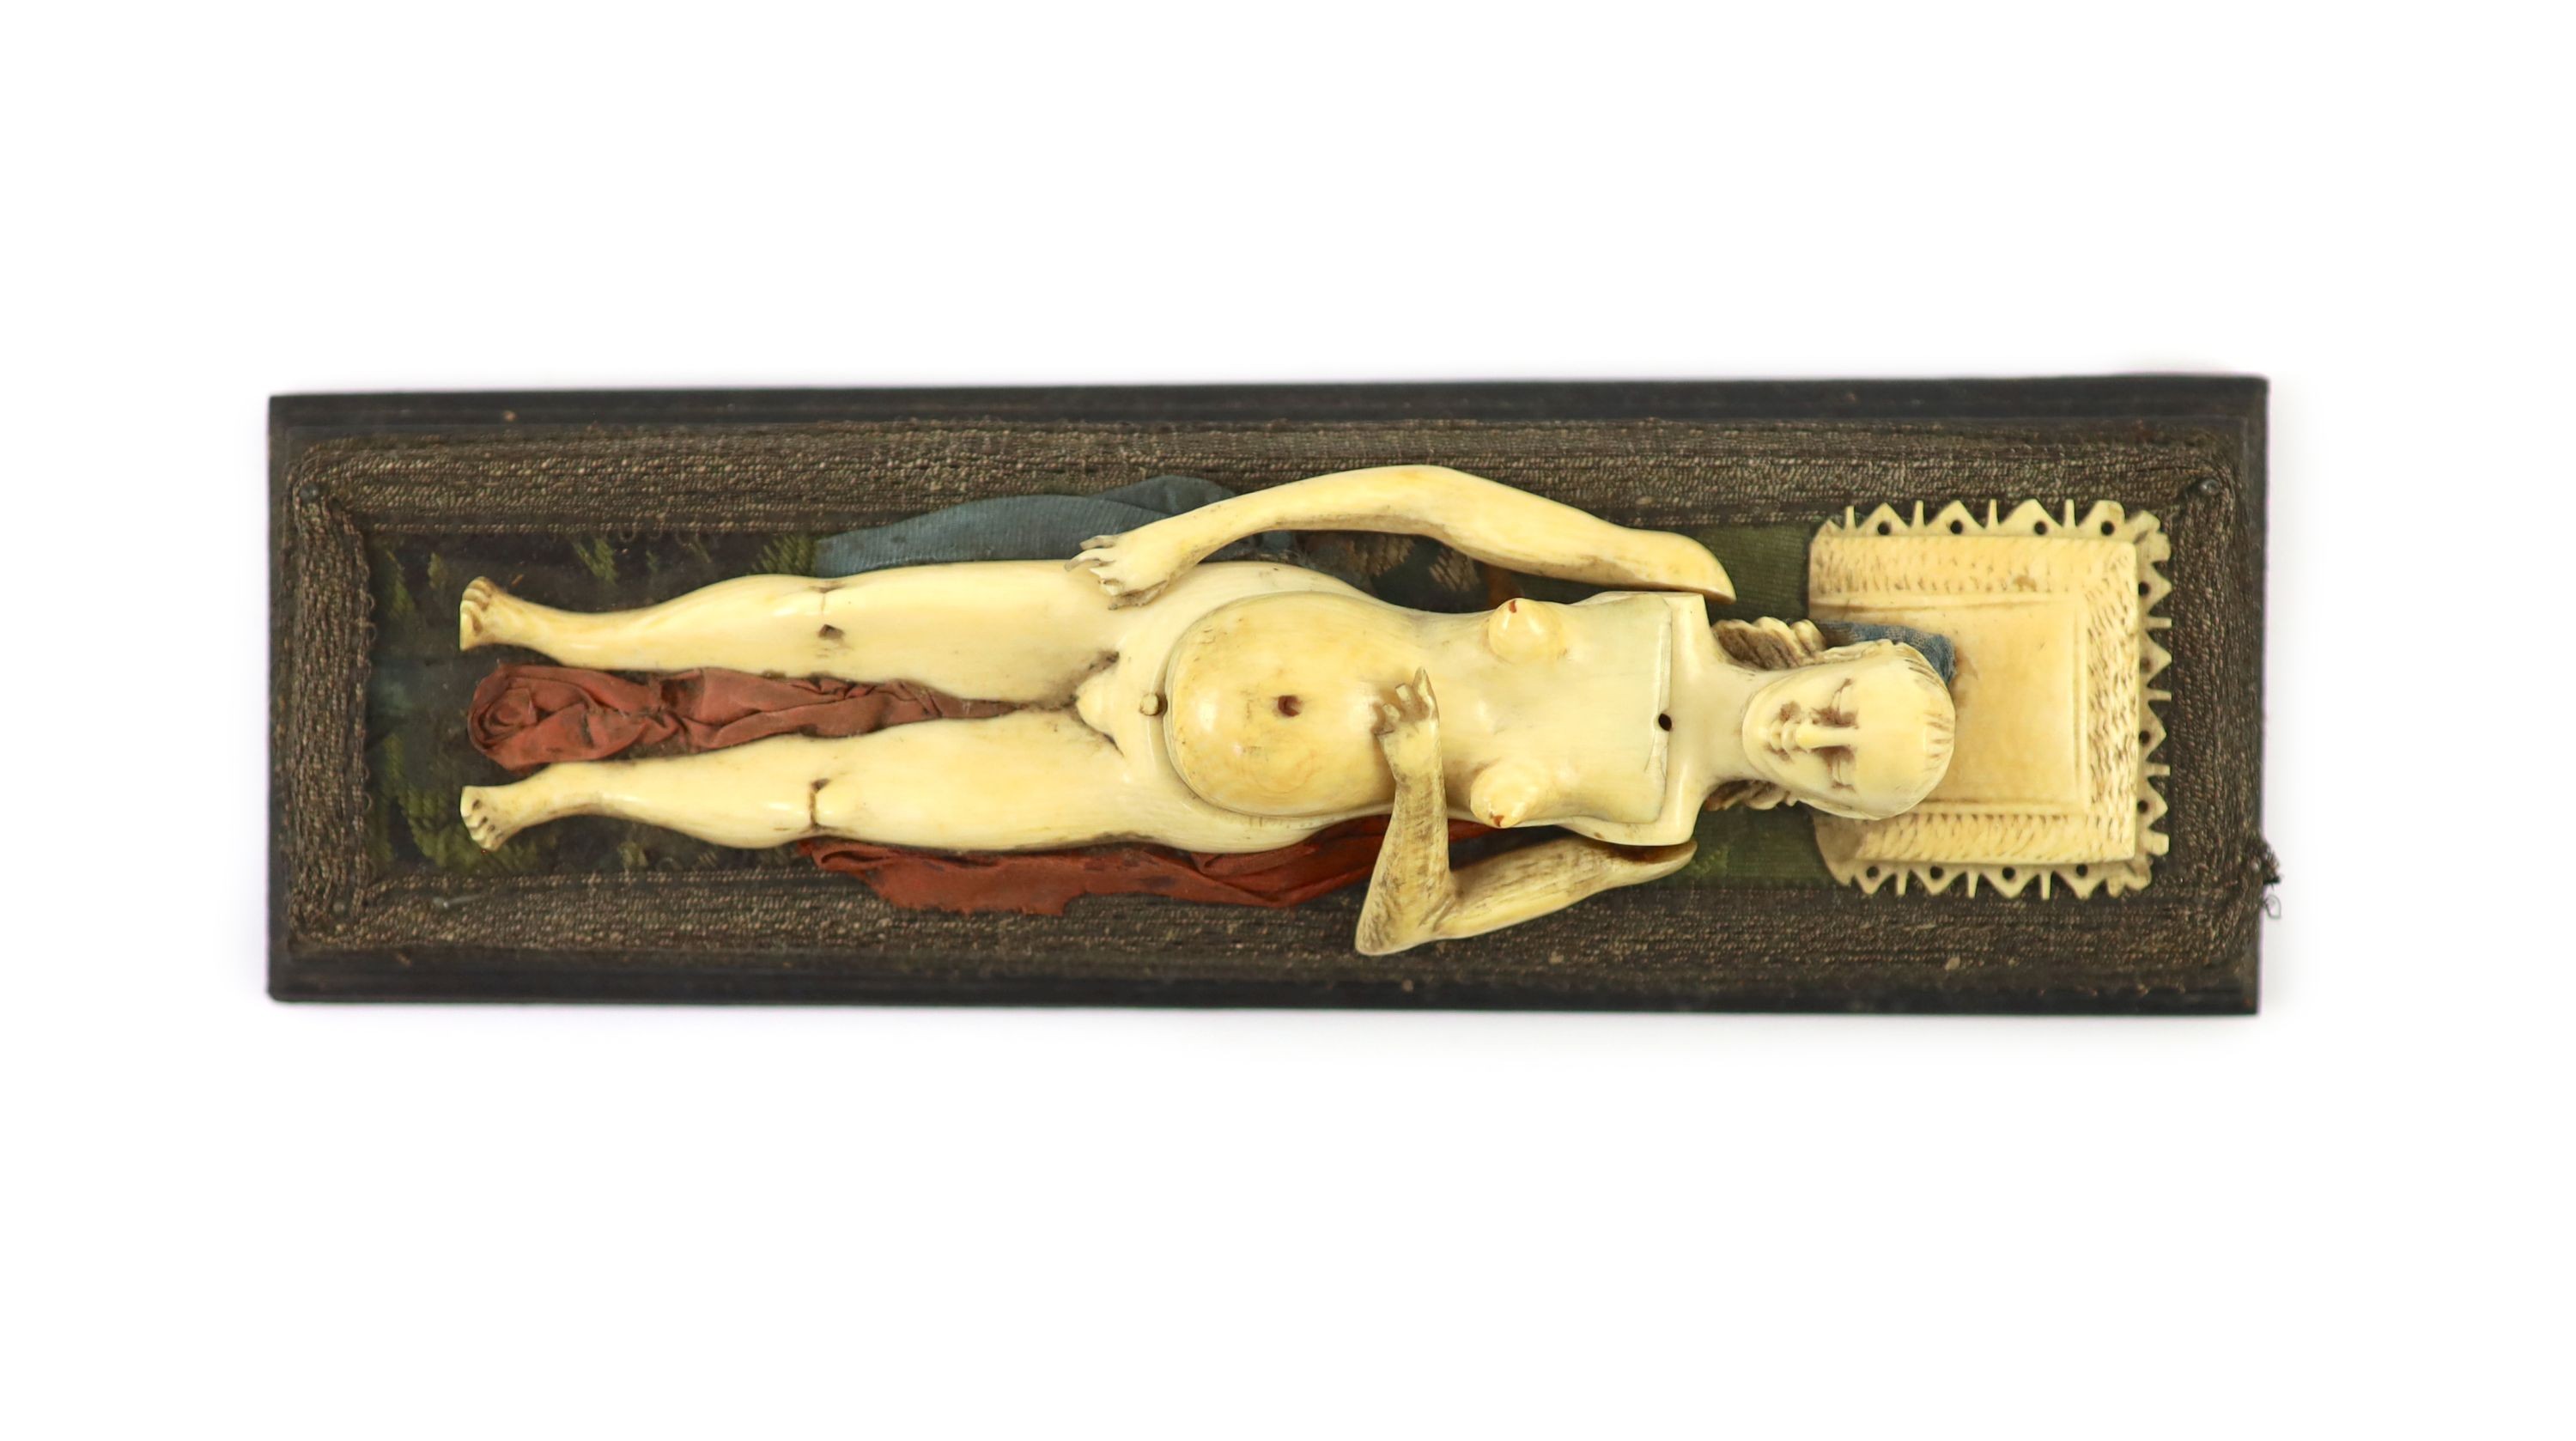 A 17th/18th century Northern European ivory female anatomical figure, probably German Nuremberg in the manner of Stephan Zick (1639-1715) Overall 23 x 7cm.